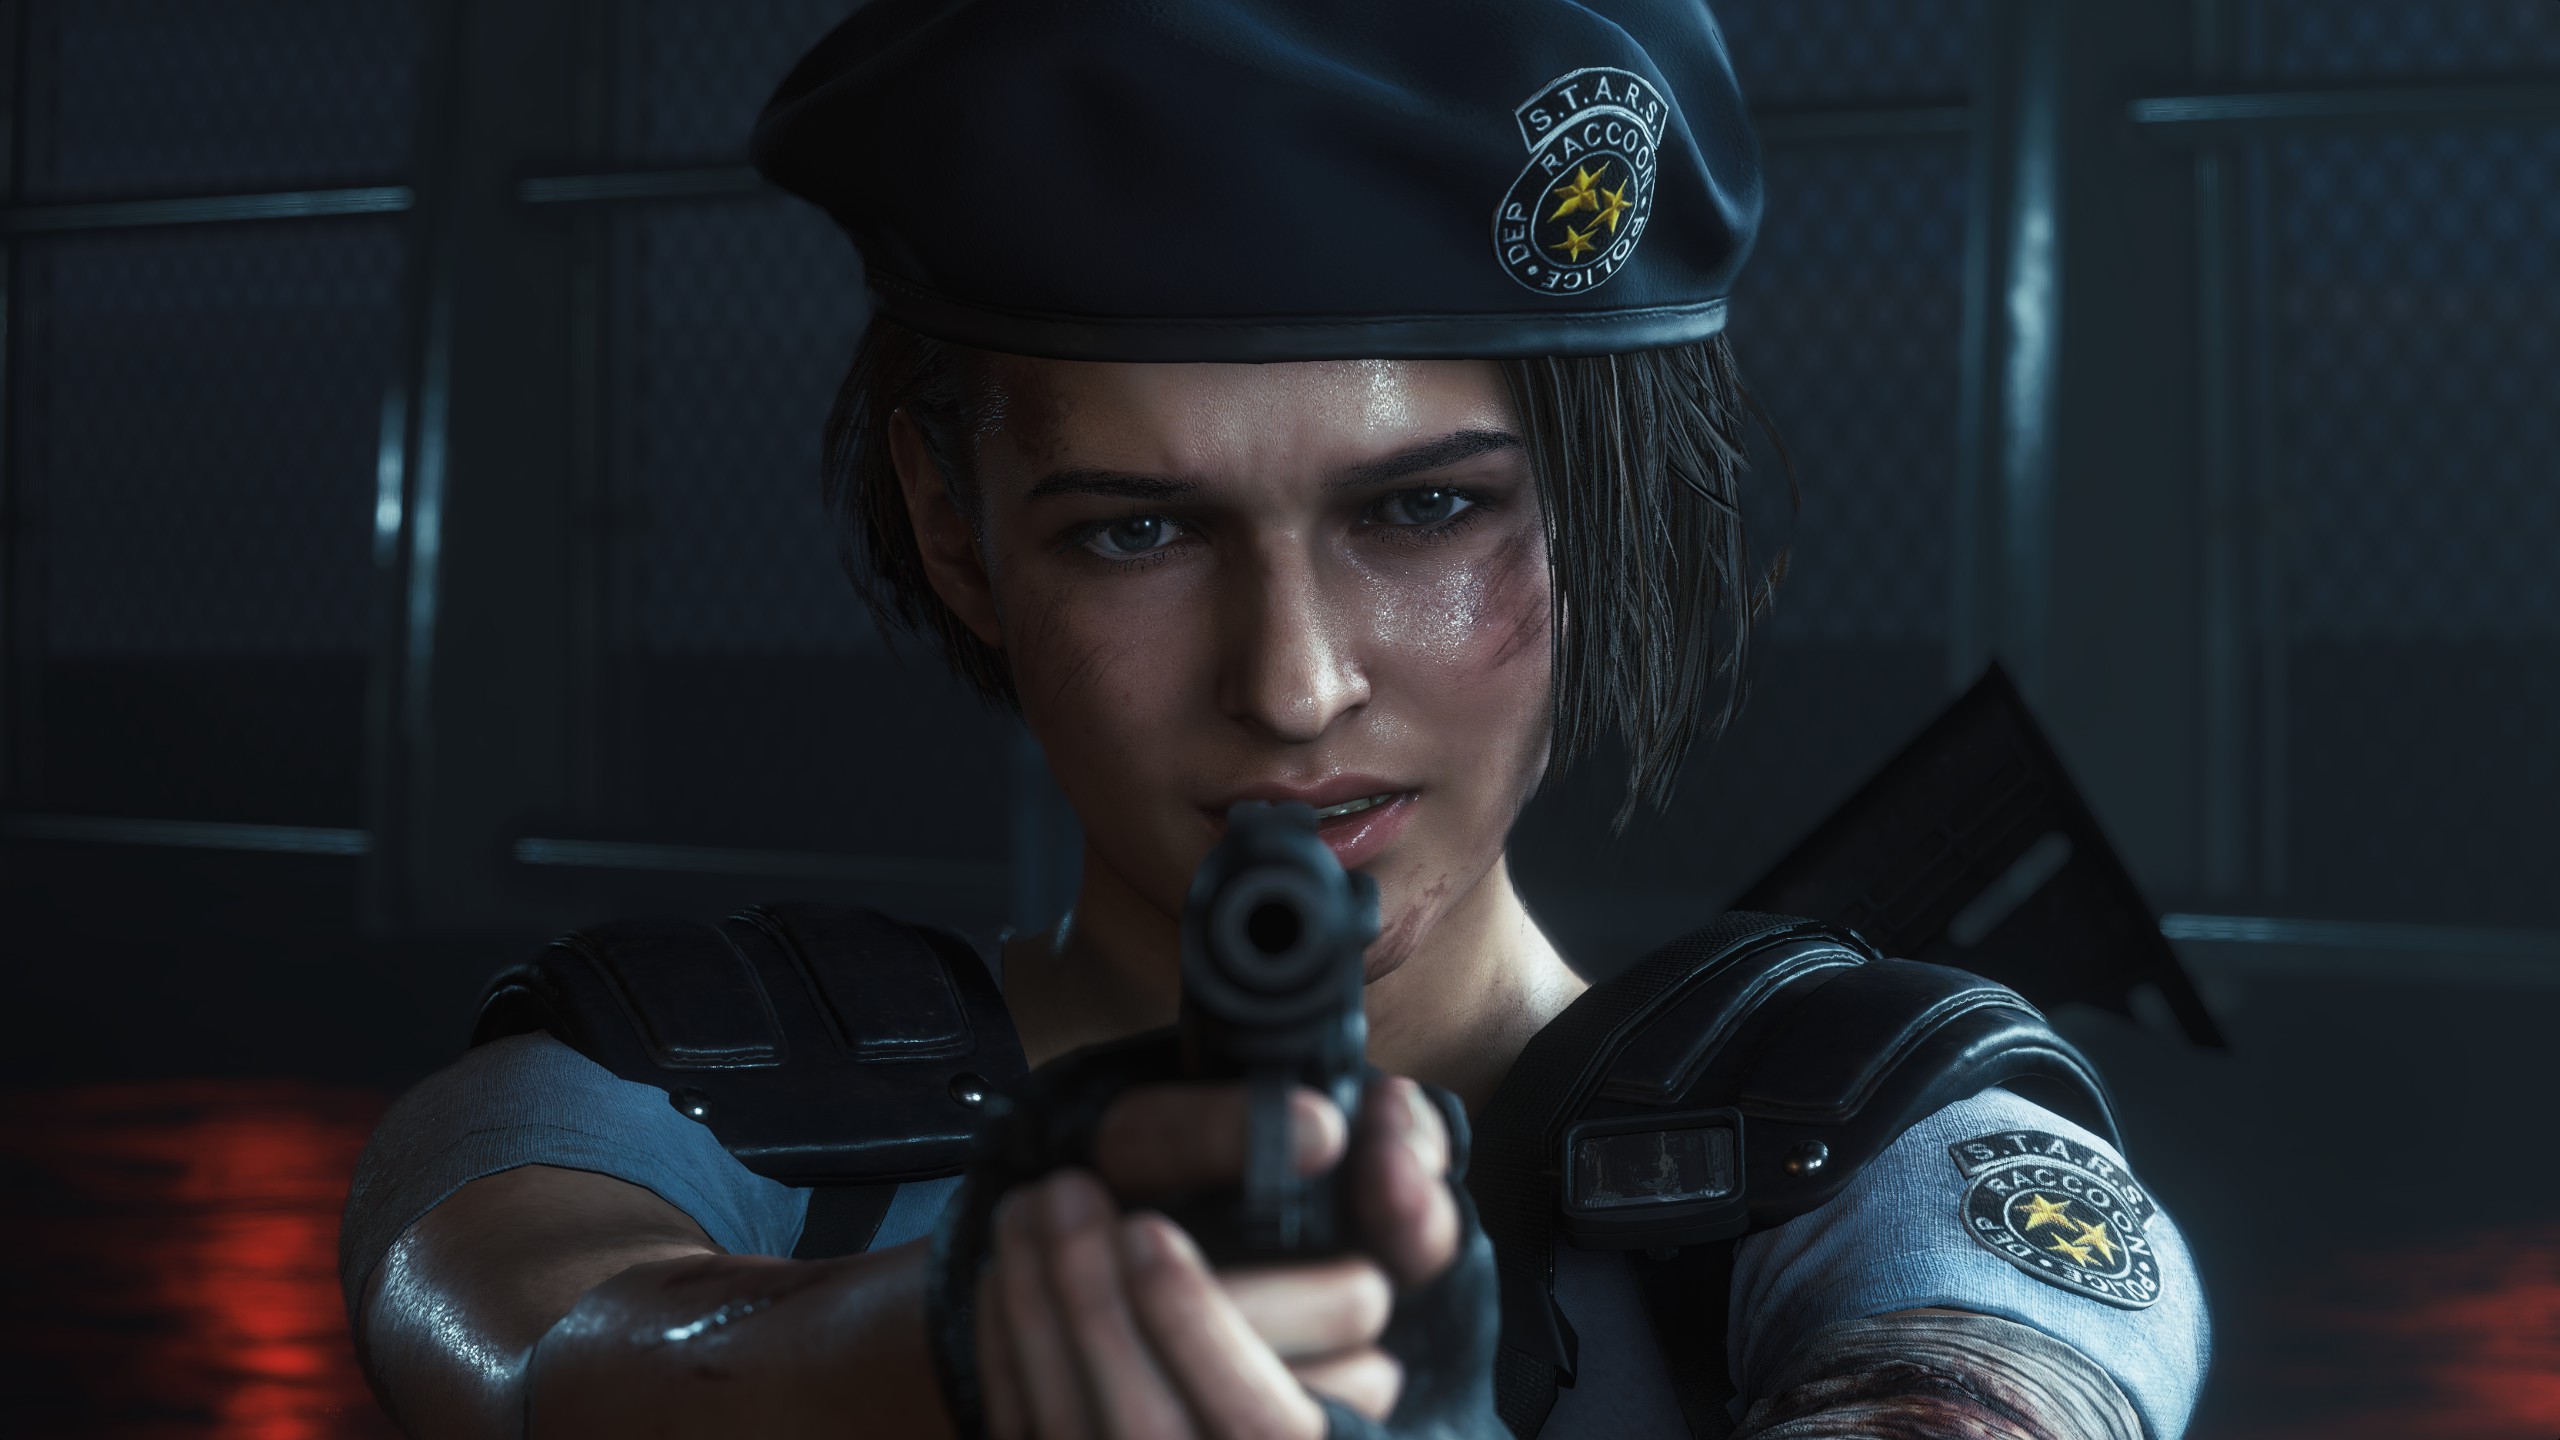 Resident Evil 3 Resident Evil Jill Valentine Video Games PC Gaming Capcom S T A R S Frontal View Res 2560x1440